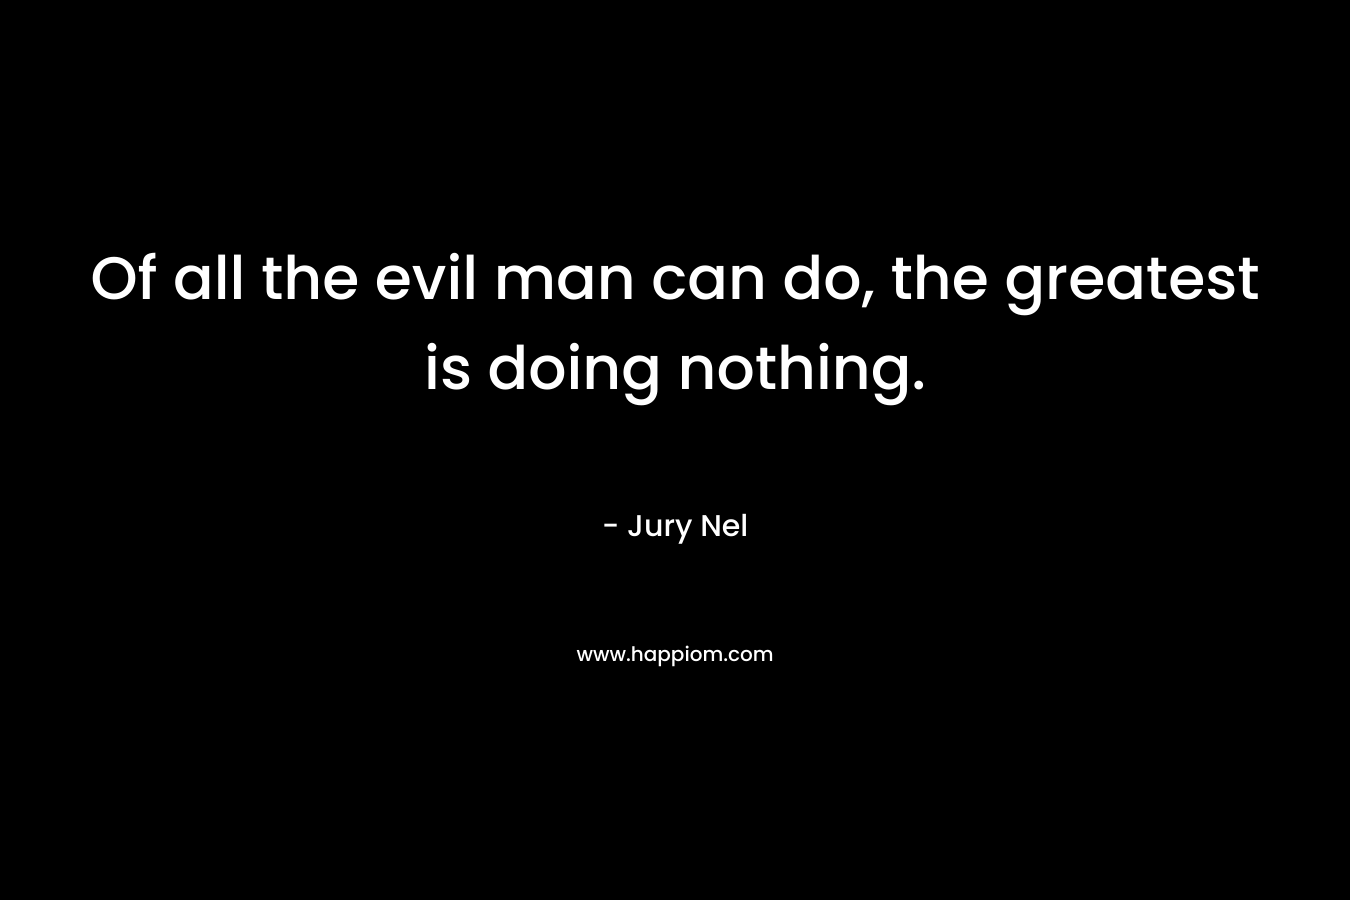 Of all the evil man can do, the greatest is doing nothing. – Jury Nel